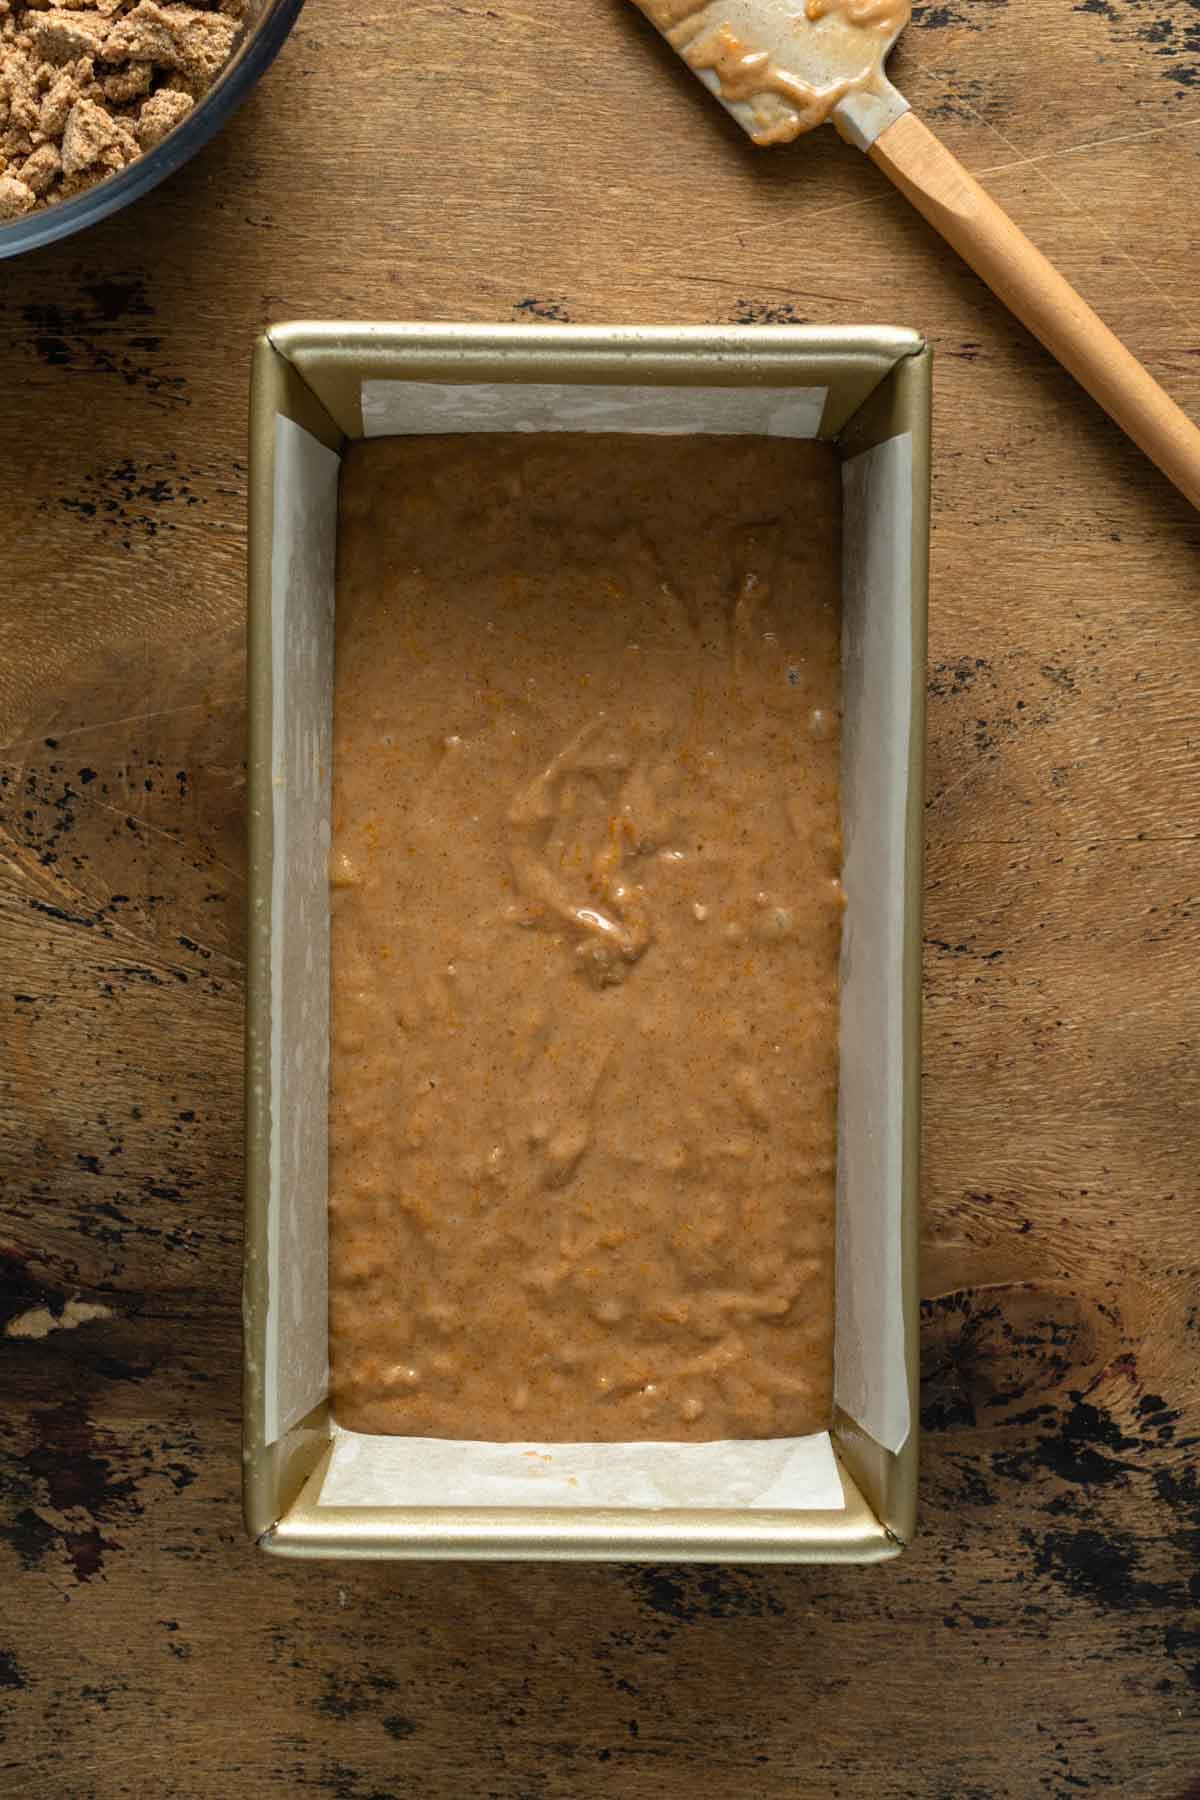 Overhead view of bread batter in a loaf pan.